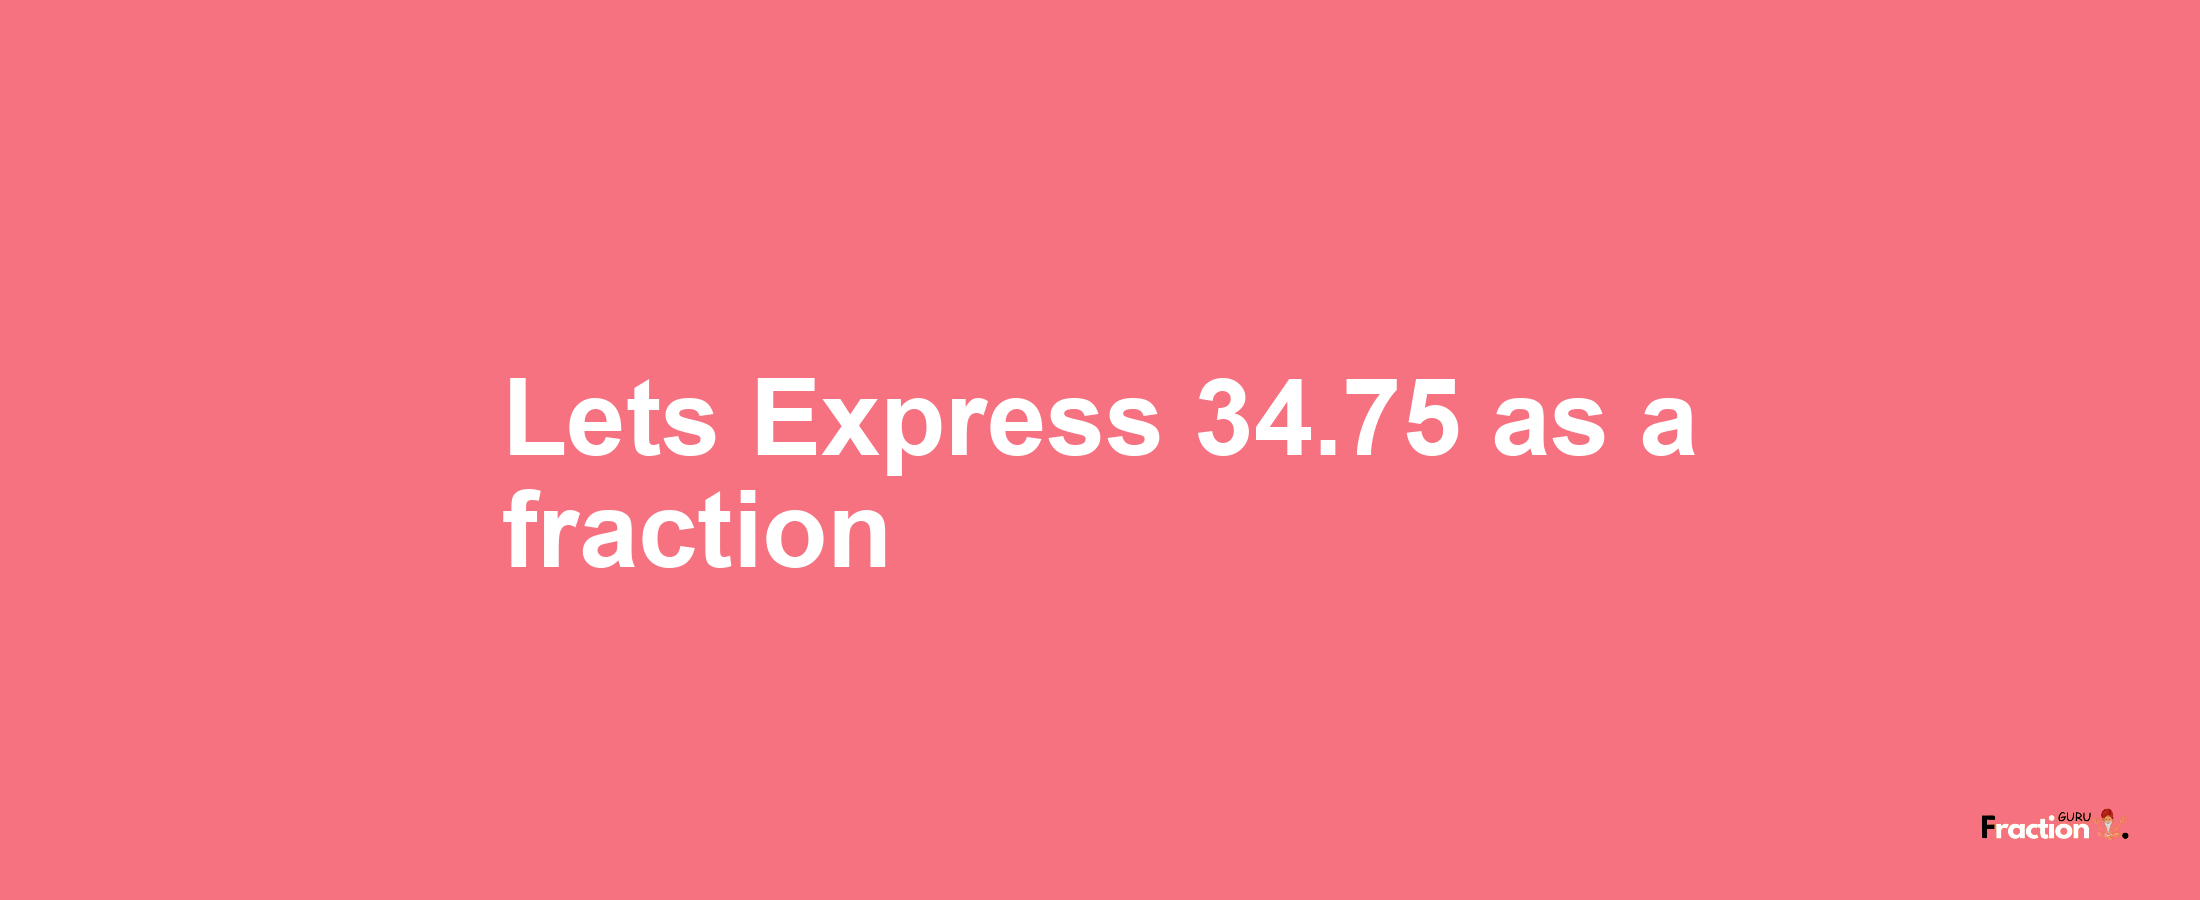 Lets Express 34.75 as afraction